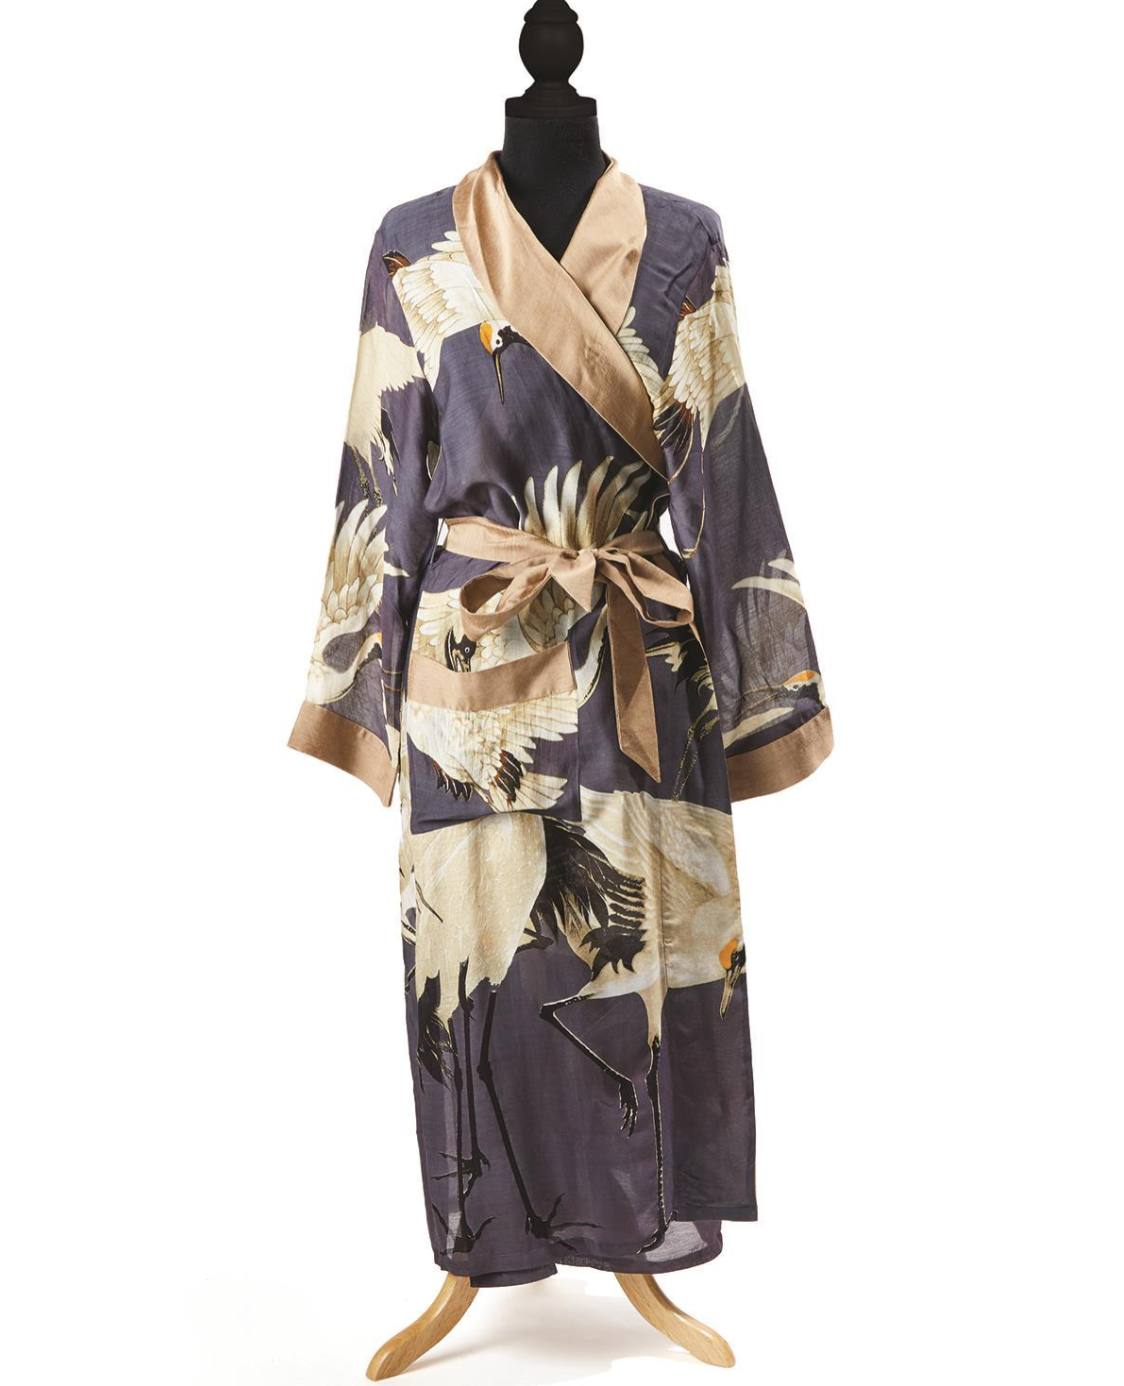 Heron Charcoal Robe Gown